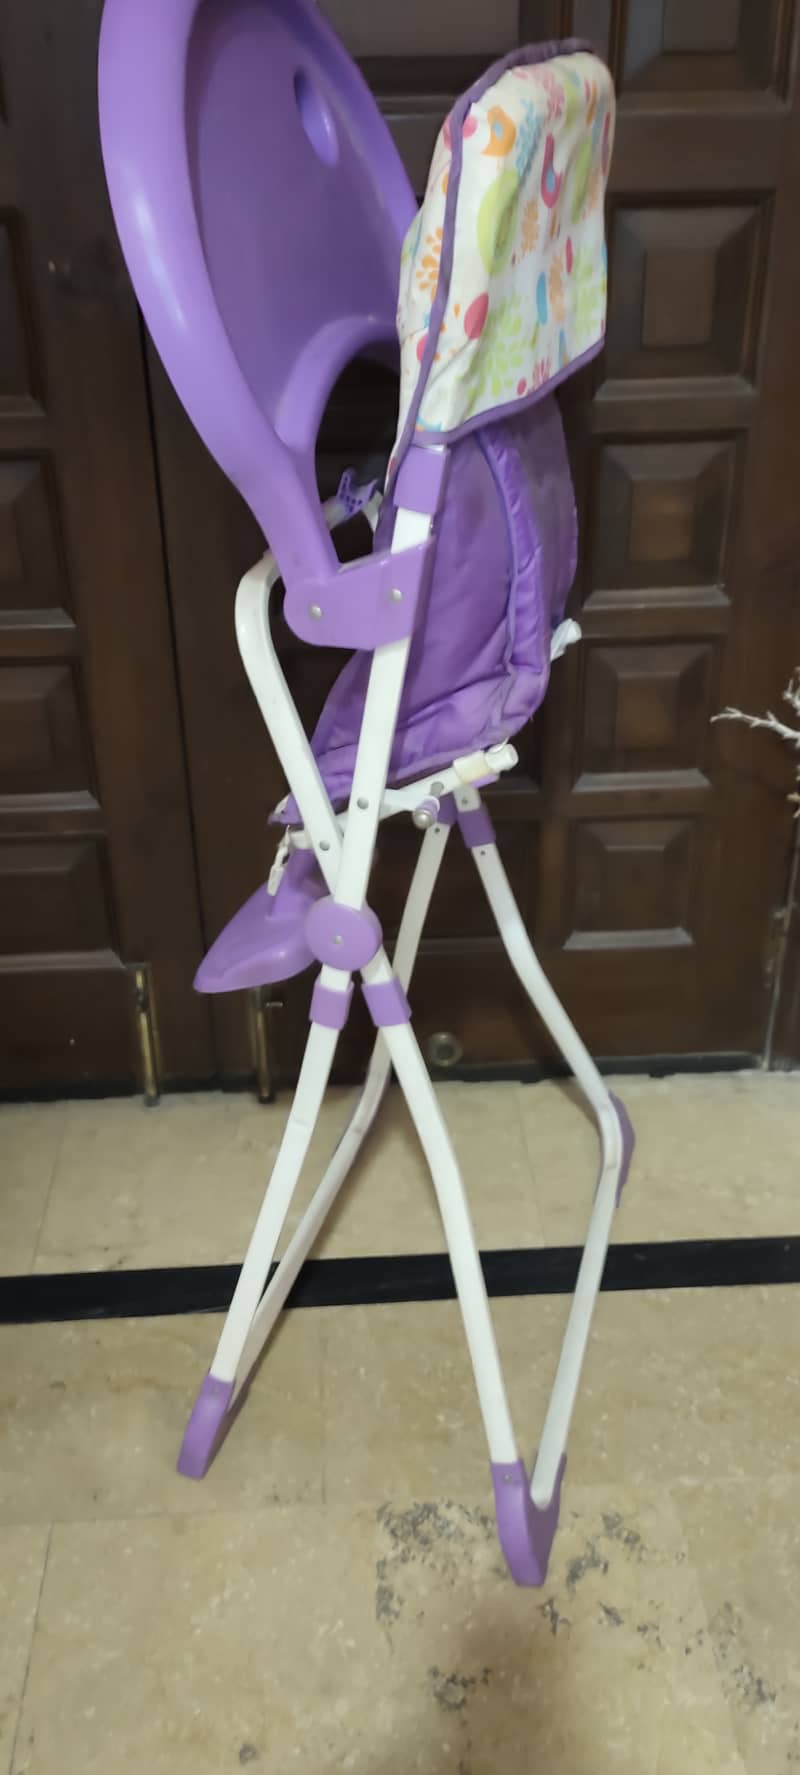 BABY DINNING CHAIR - (FOLDABLE) GOOD CONDITION 5